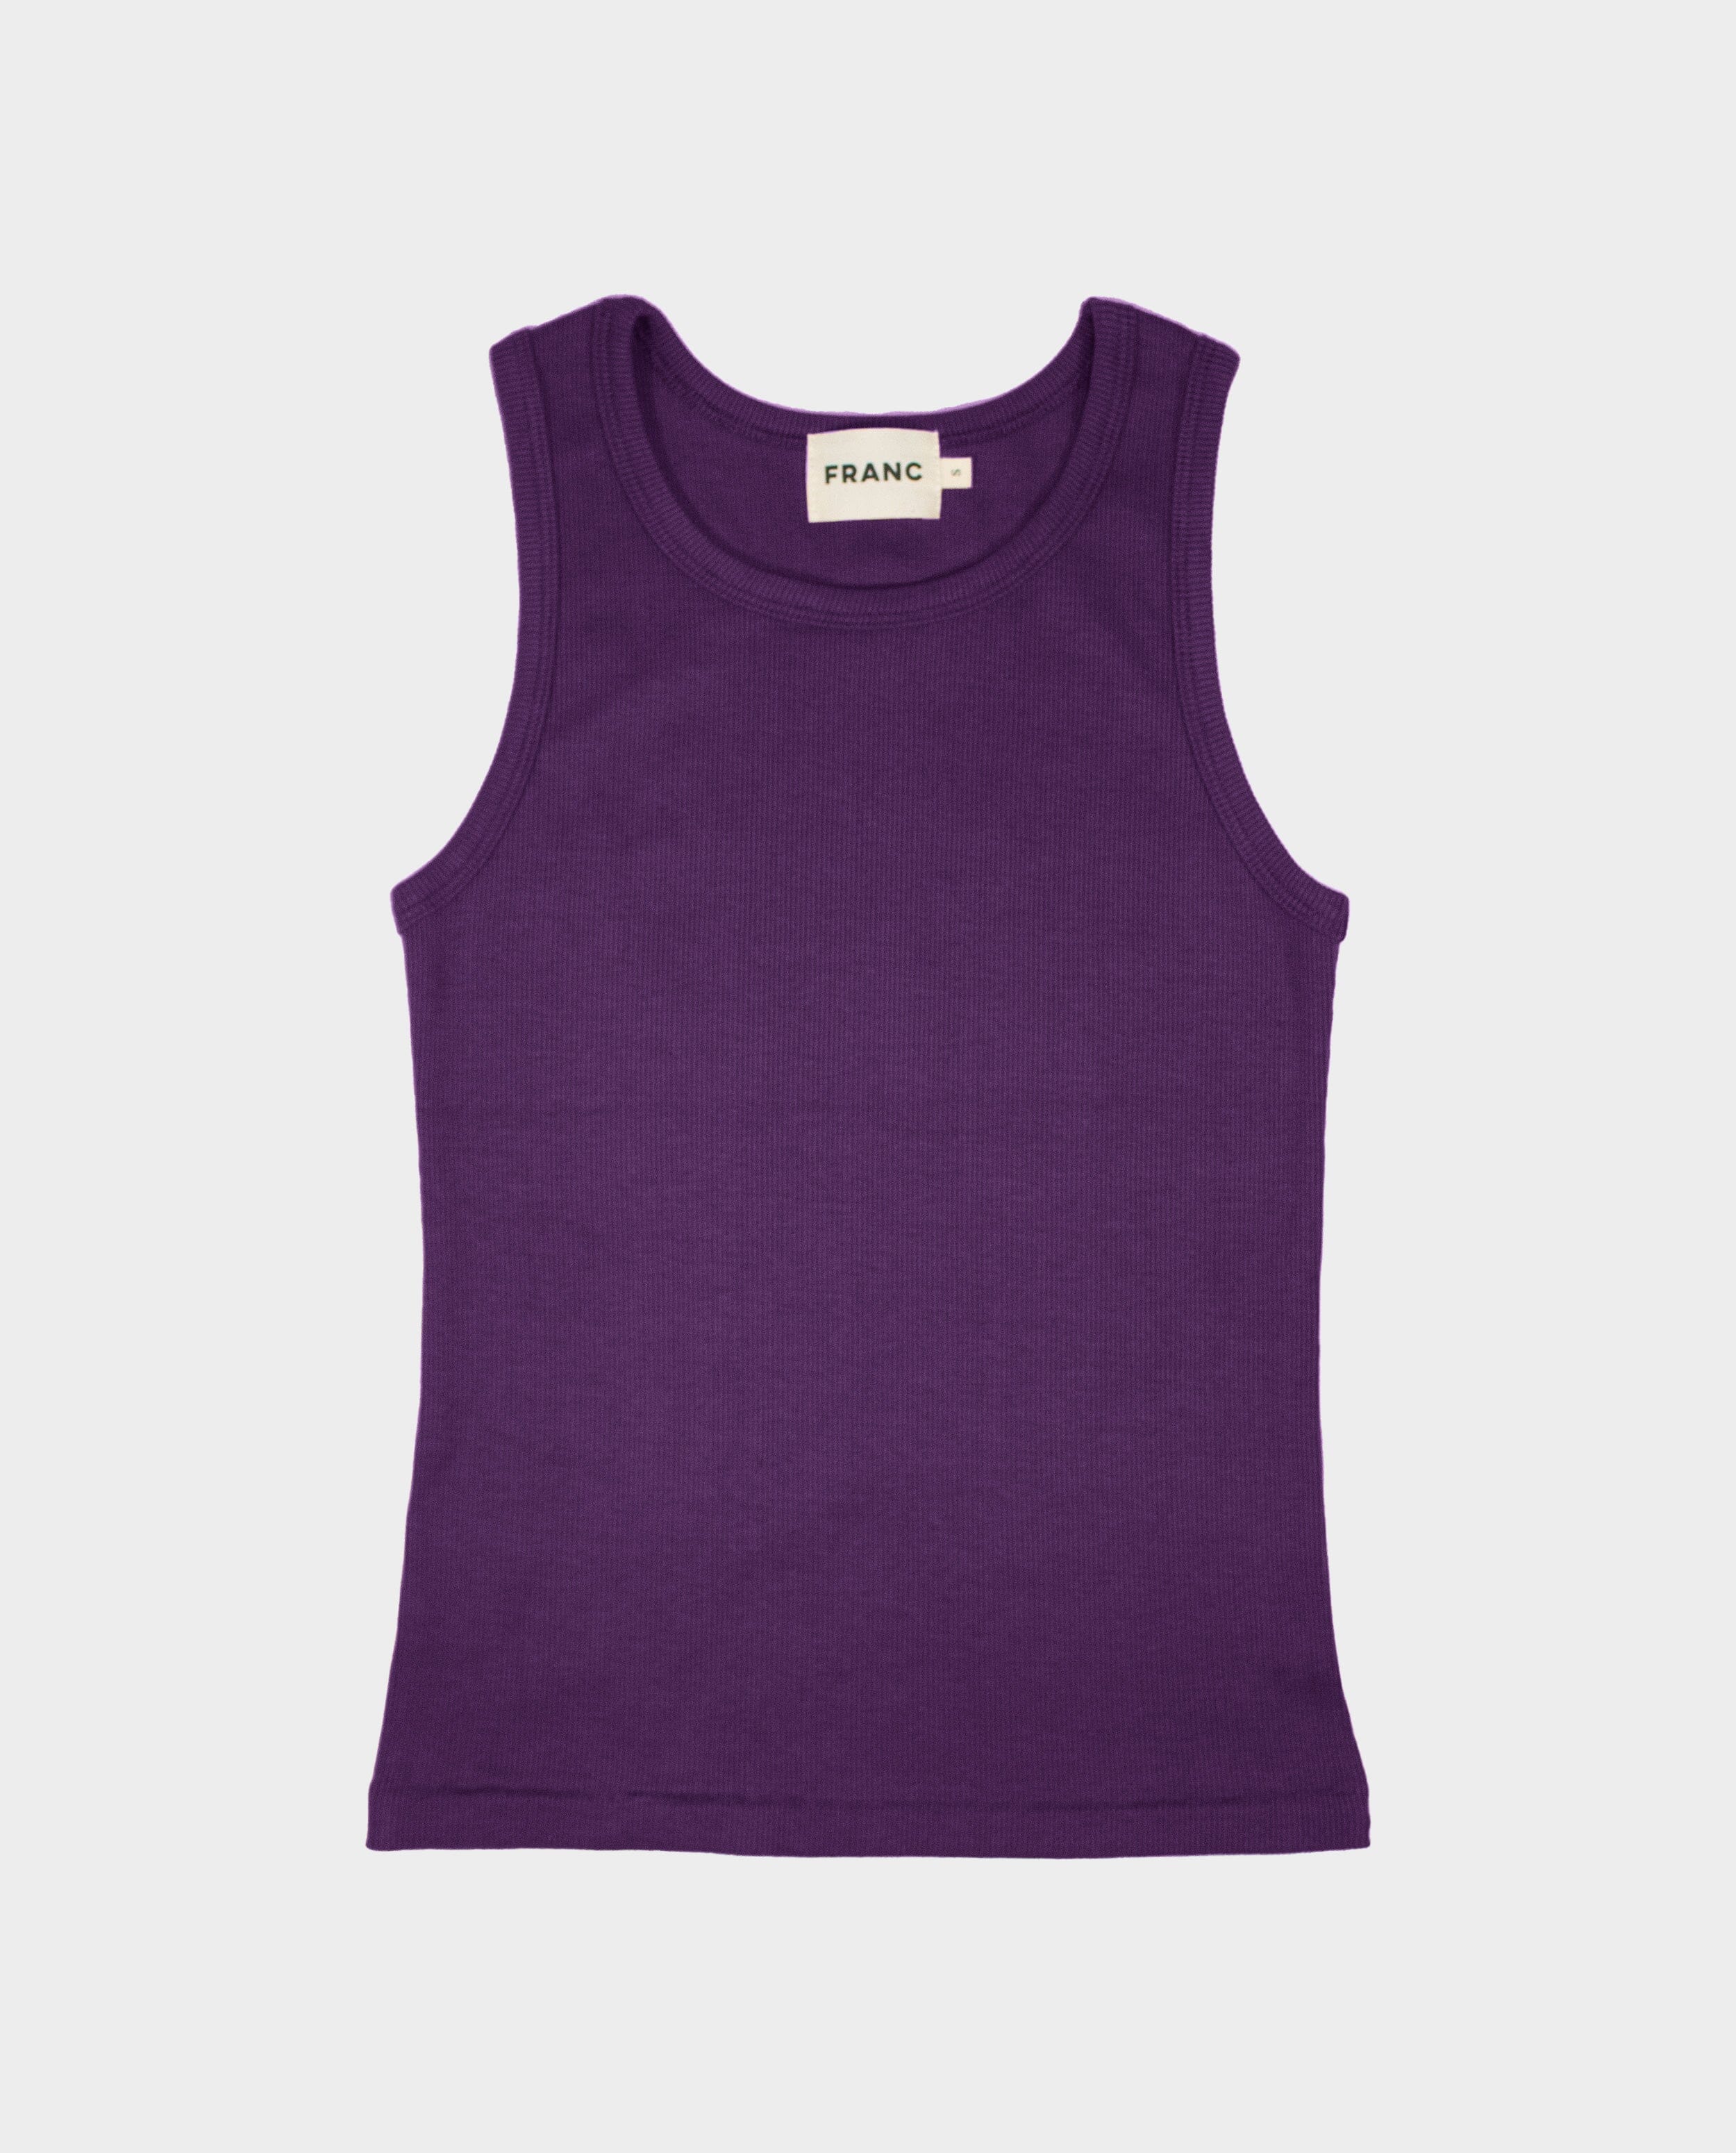 The Tuckable Rib Tank in Eggplant | FRANC Sustainable Clothing